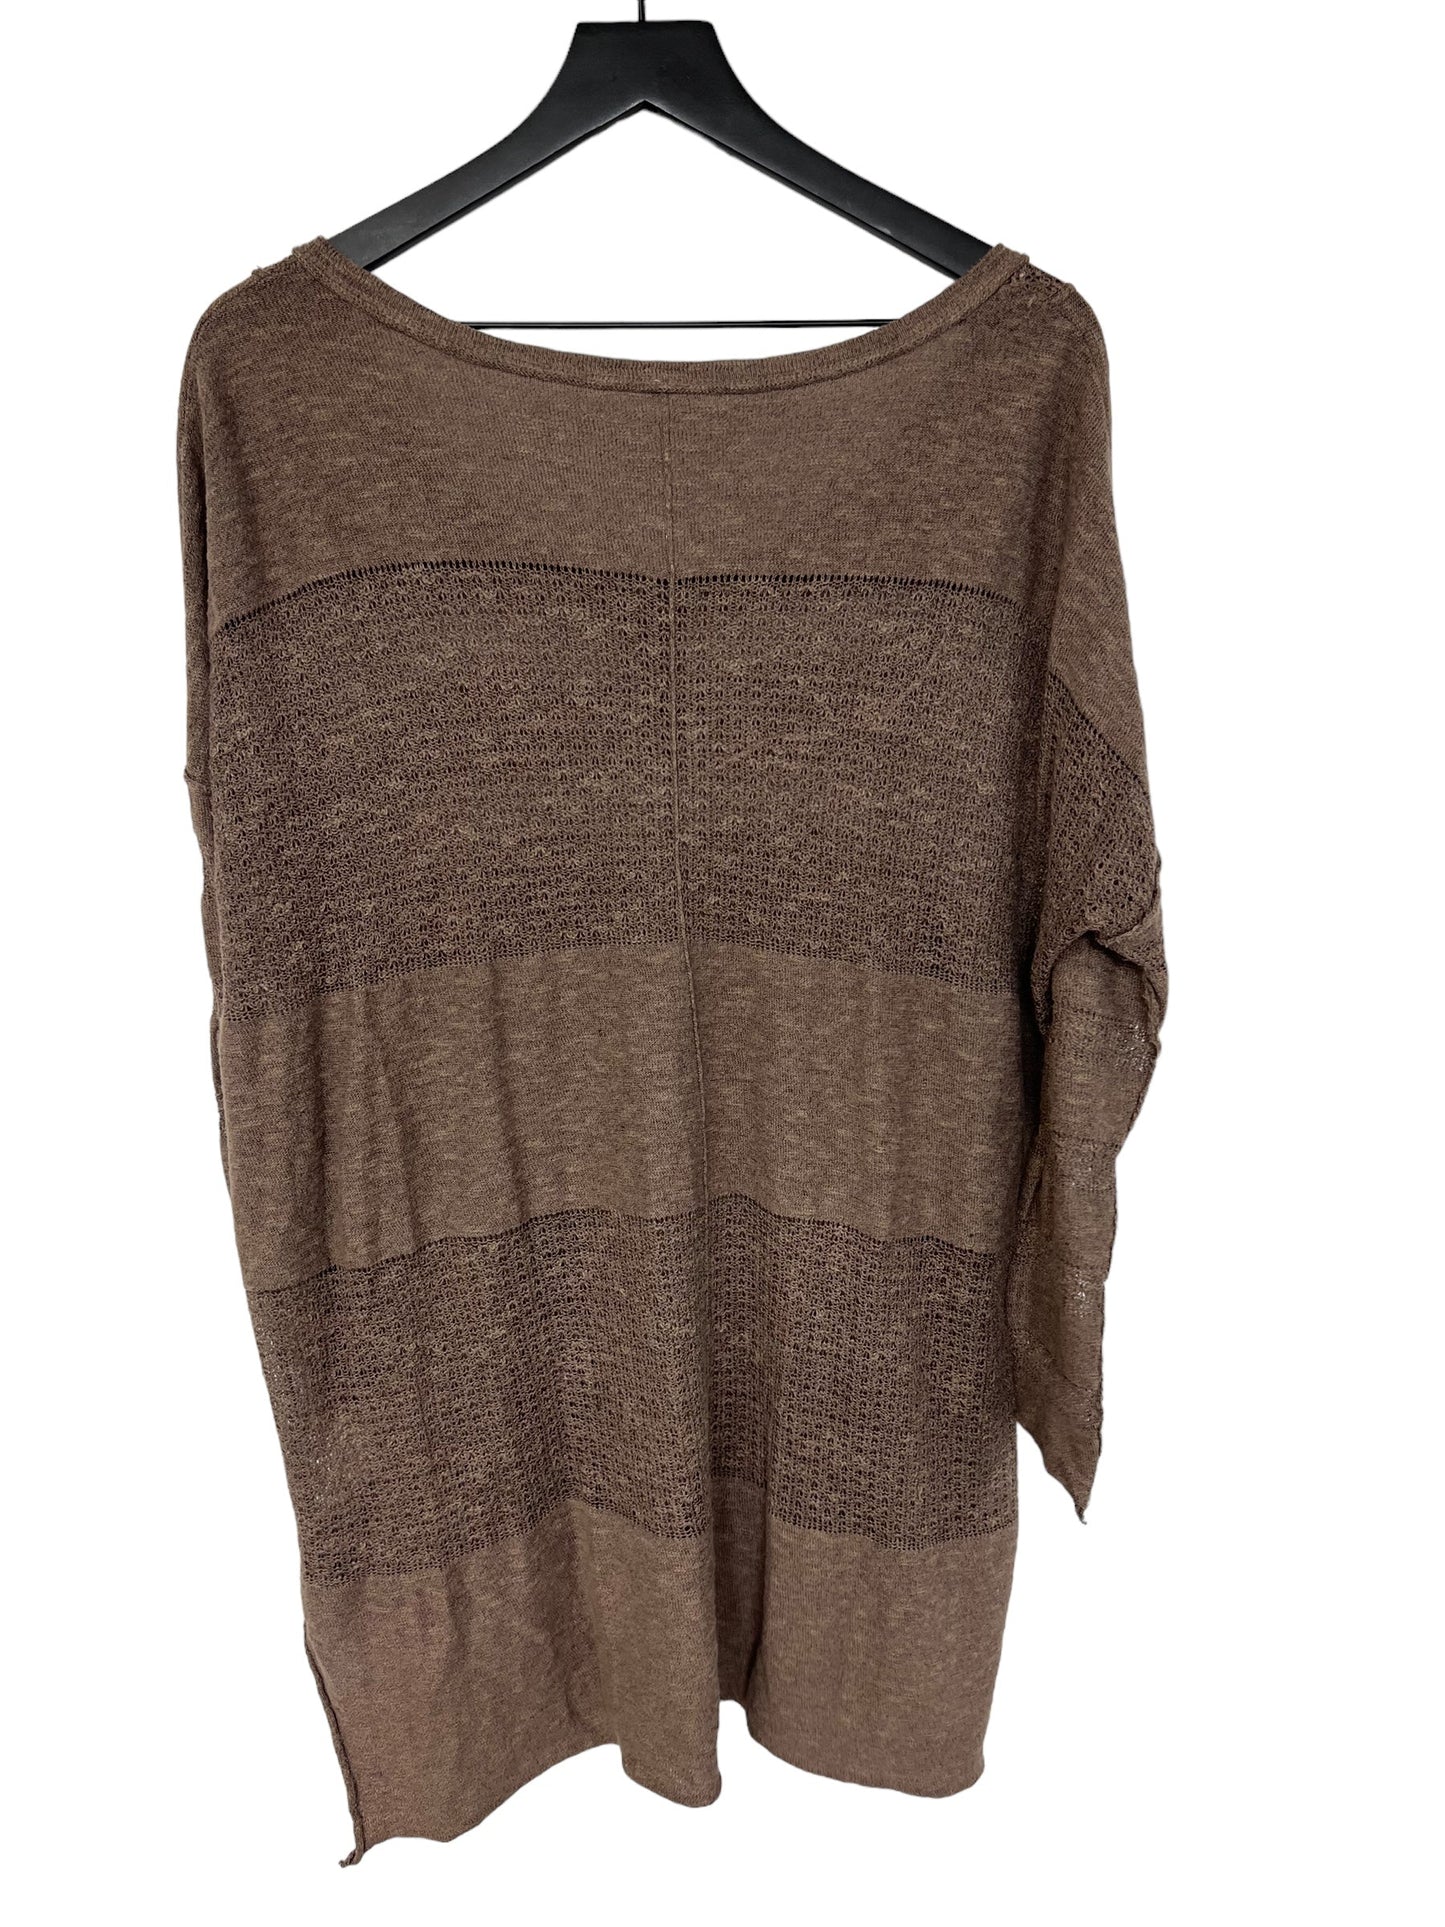 Brown Top Long Sleeve Free People, Size S